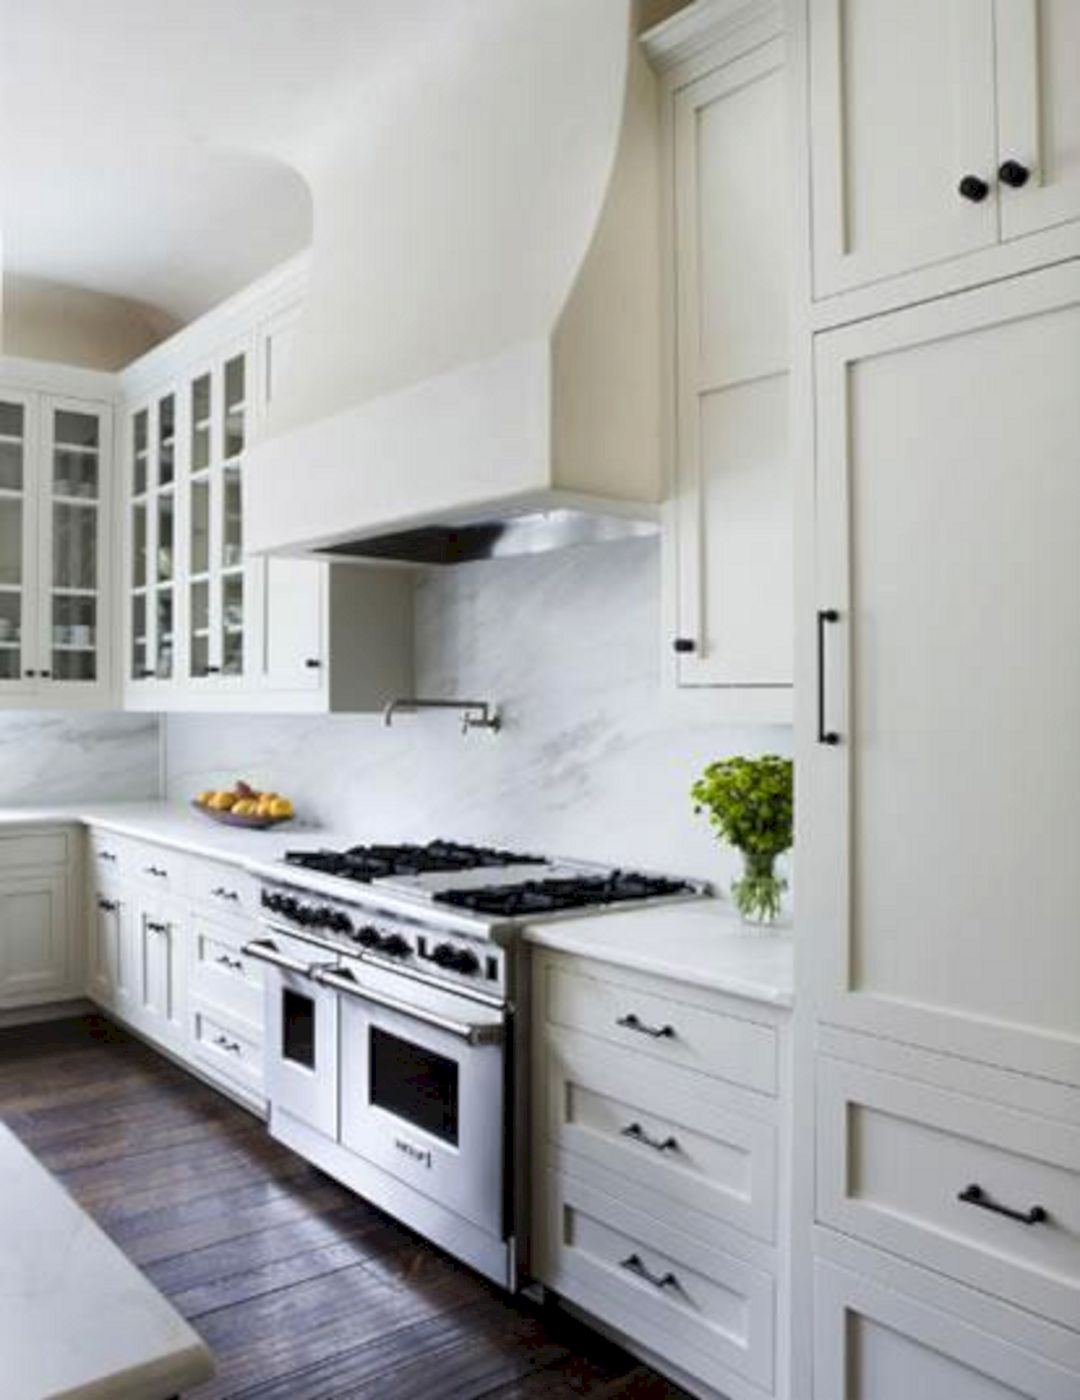 IKEA Kitchen Cabinets With White Marble Countertop (IKEA ...